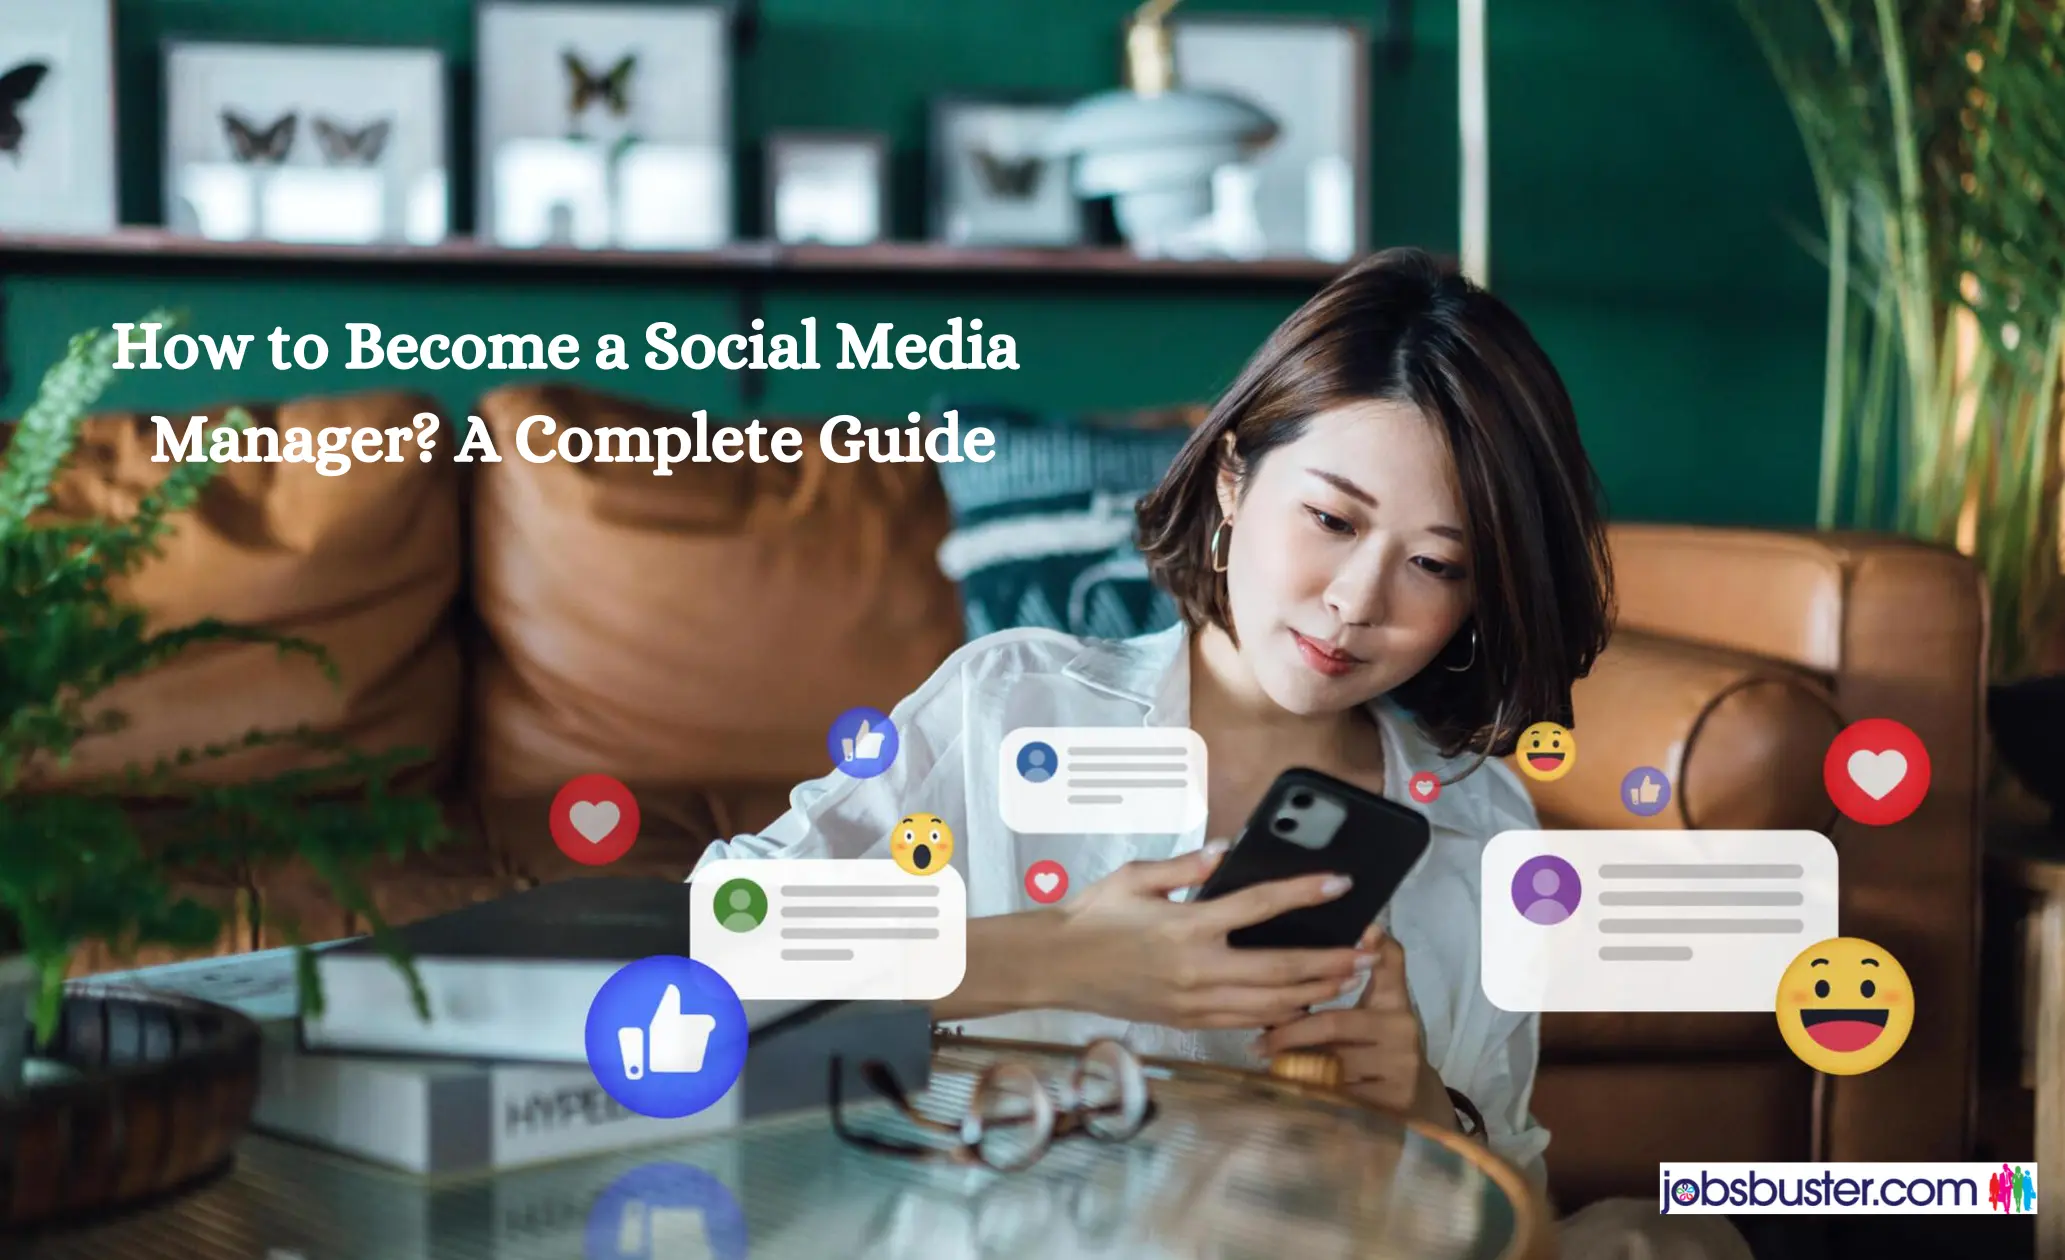 How to Become a Social Media Manager? A Complete Guide